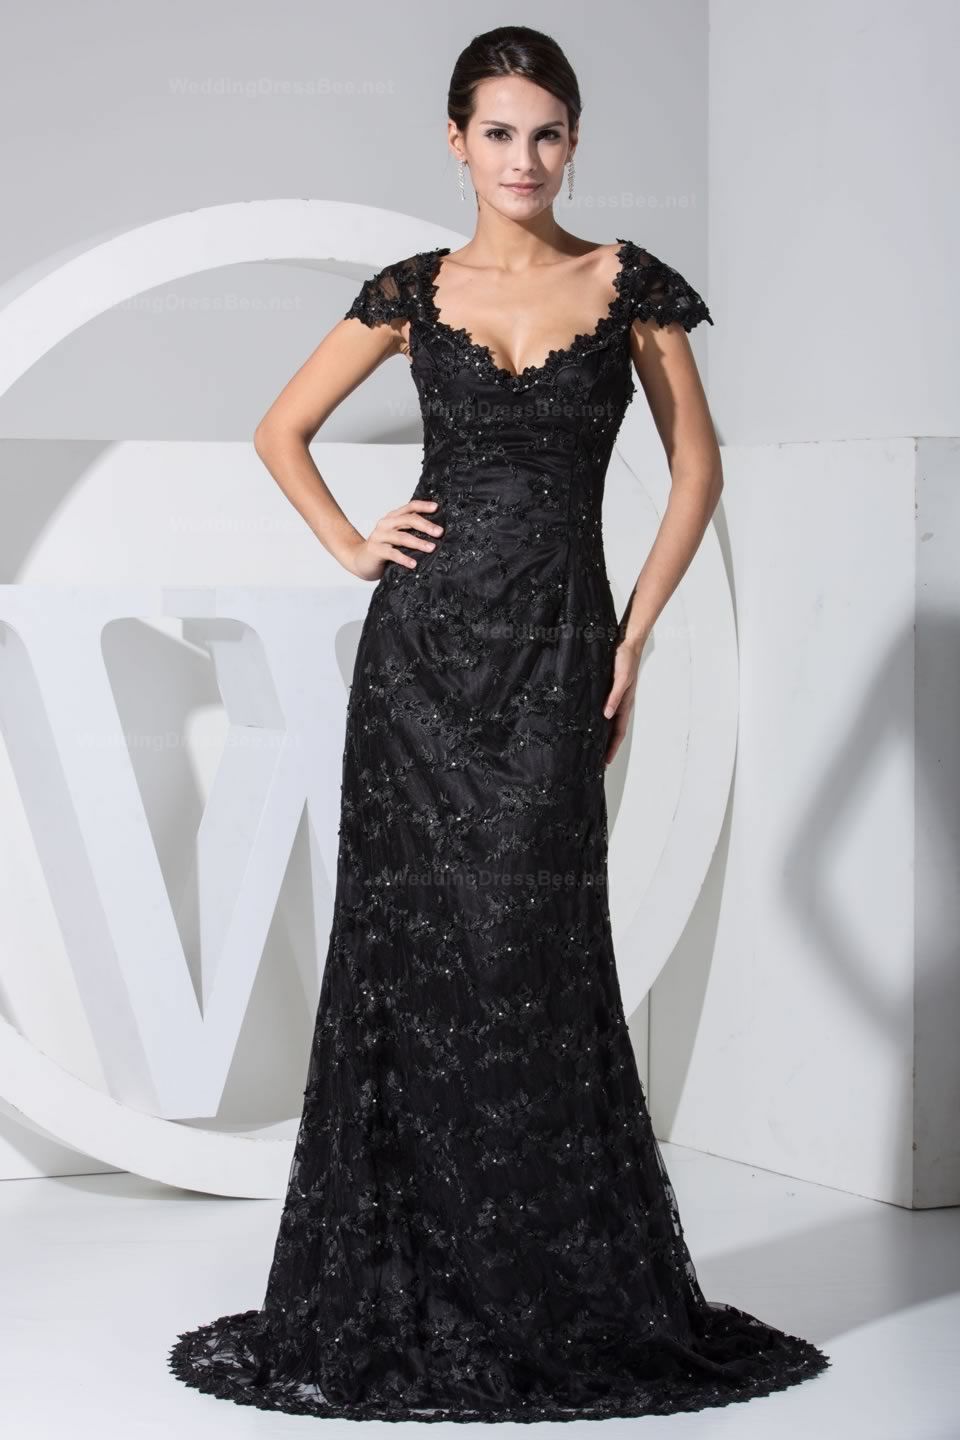 Slim A-line with cap sleeve lace overlay evening dress